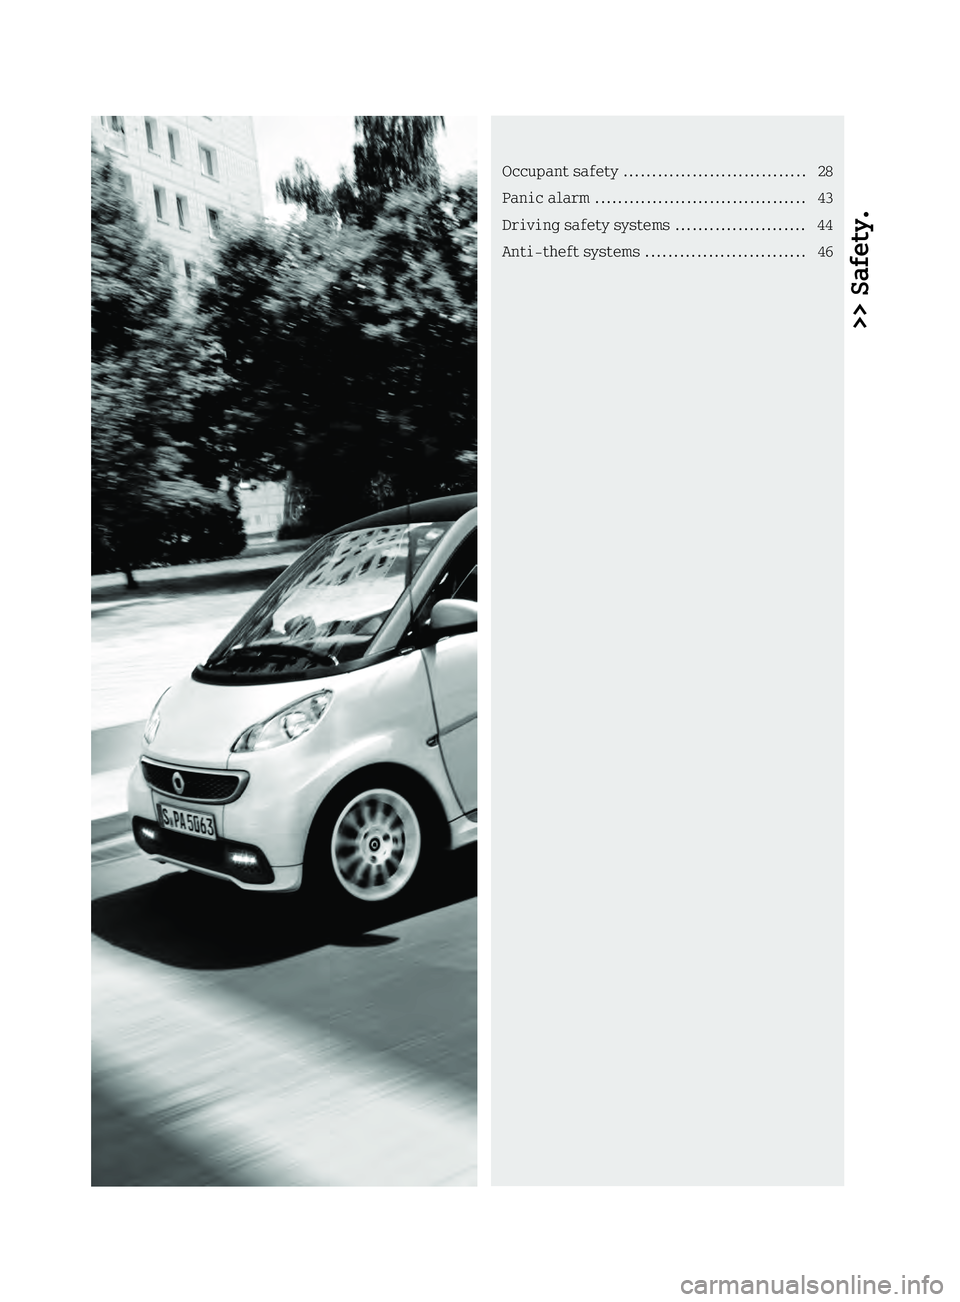 SMART FORTWO COUPE 2013 Owners Manual >> Safety.Occupan
tsafety ................................ 28
Panic alarm ..................................... 43
Driving safety systems .......................44
Anti-theft systems .................